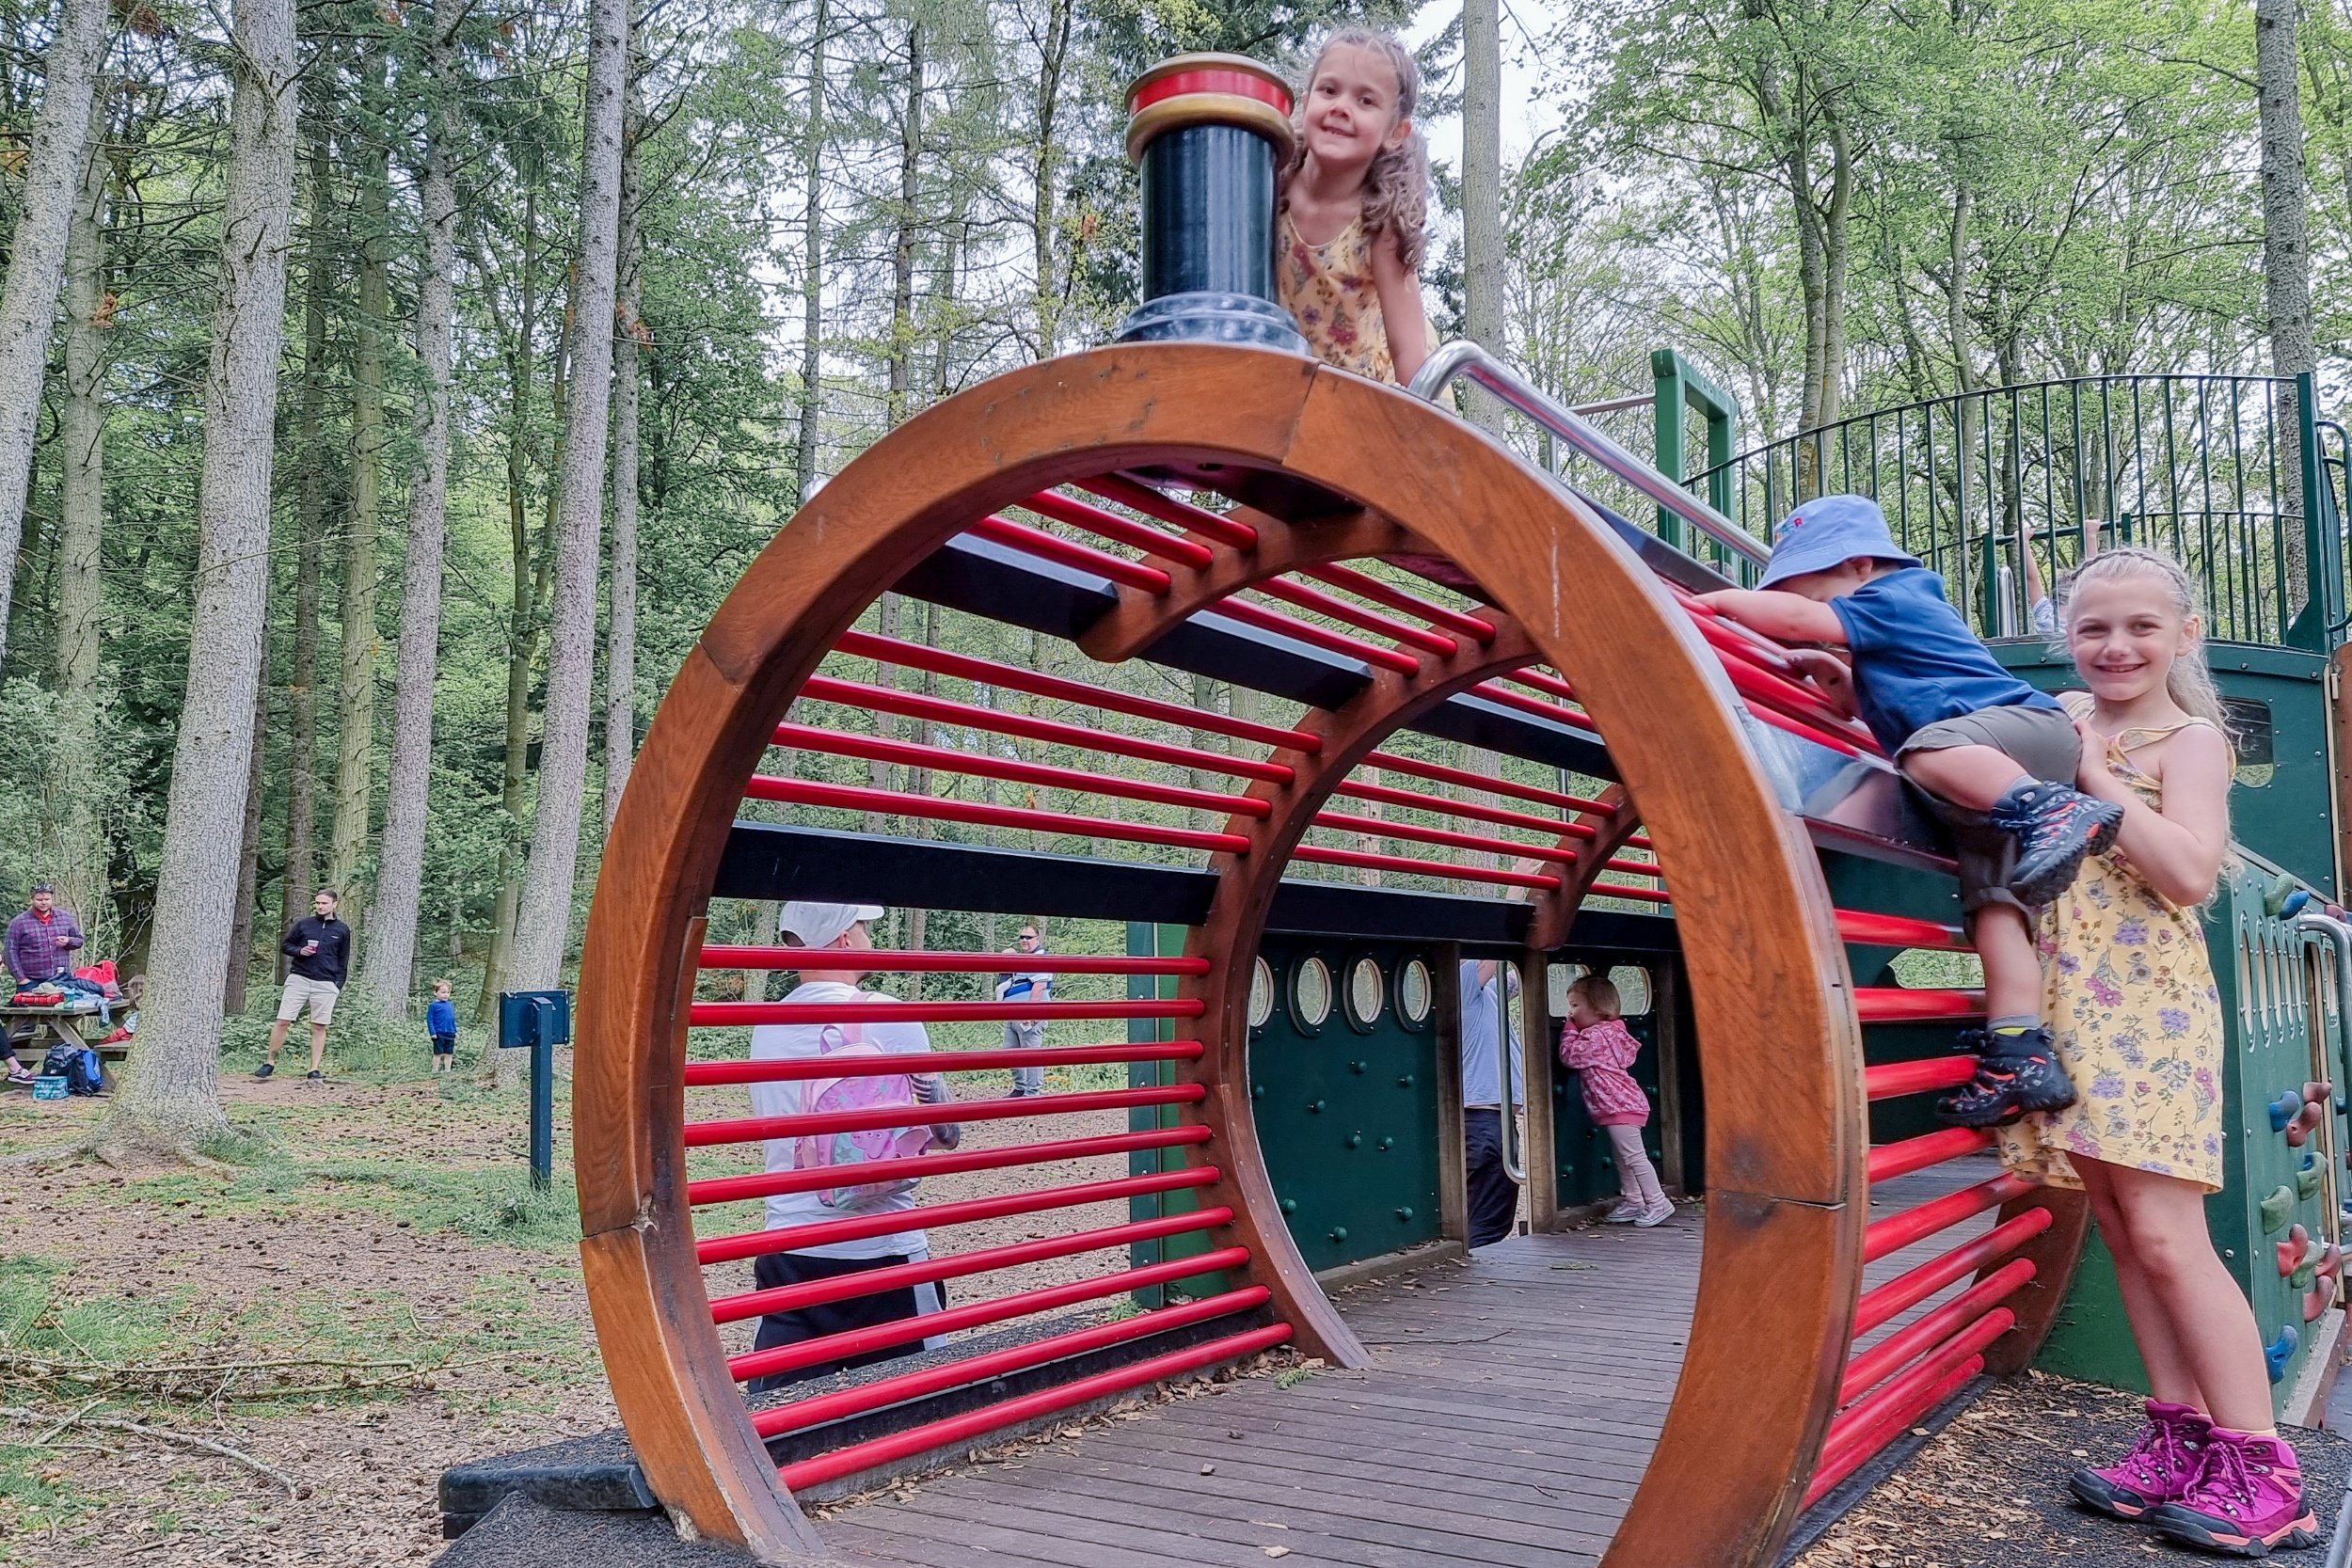 An image of the front of the play train. You can see Pickle on top, with Squidgy and Munchkin climbing the side. It is situated in a woodland setting.